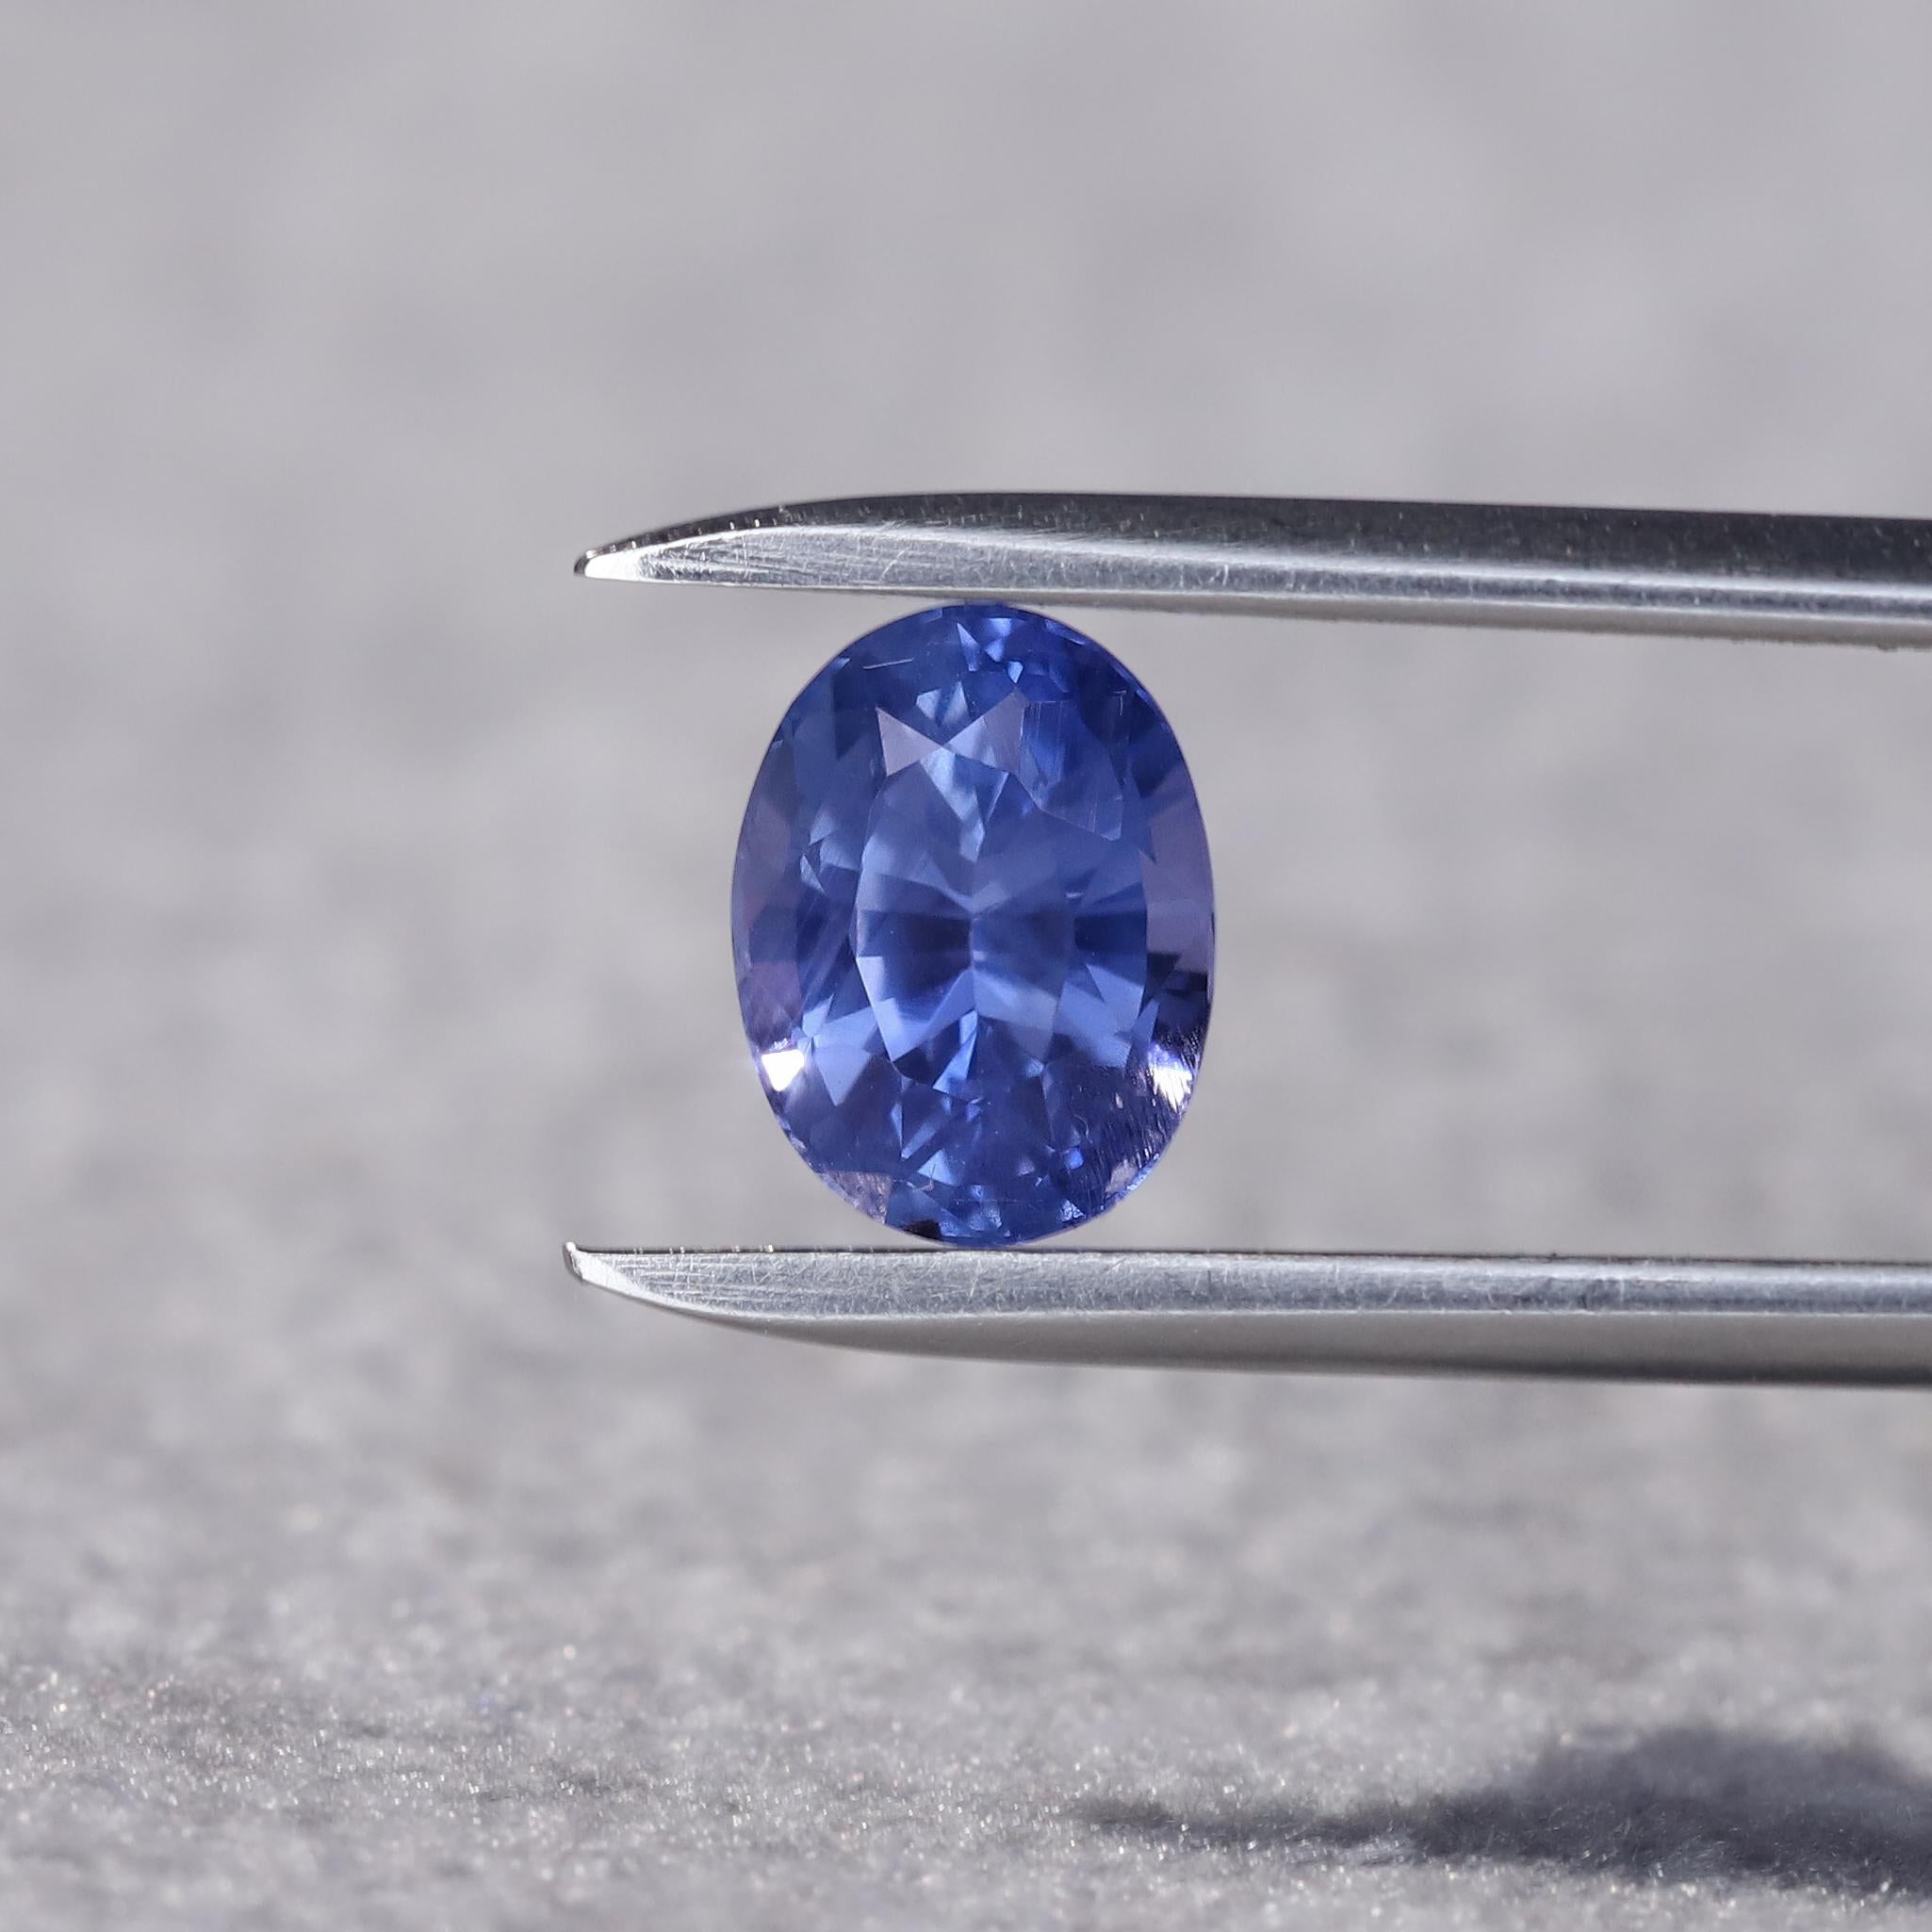 Luscious hues on this natural unheated Ceylon sapphire and its crisp cut facets come alive in sunlight, illuminating the gem with a radiant and luminous blue-violet glow - a highly desirable feature in an unheated blue sapphire.

Natural unheated